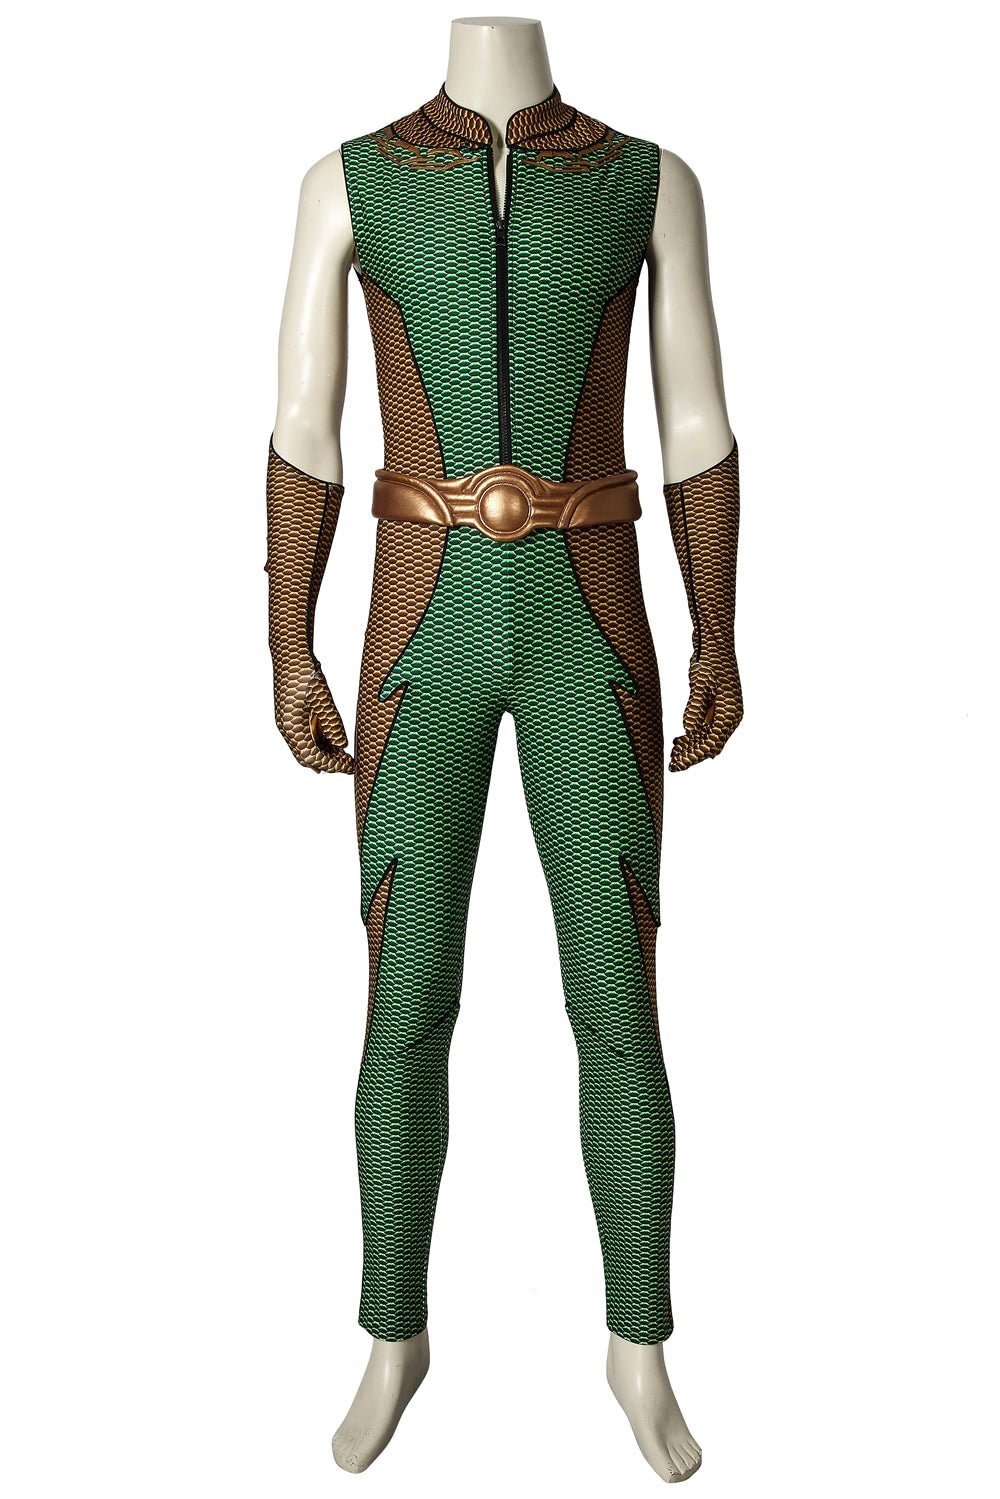 The Boys Season 1 Cosplay Costume Deep The Seven Cosplay Suit